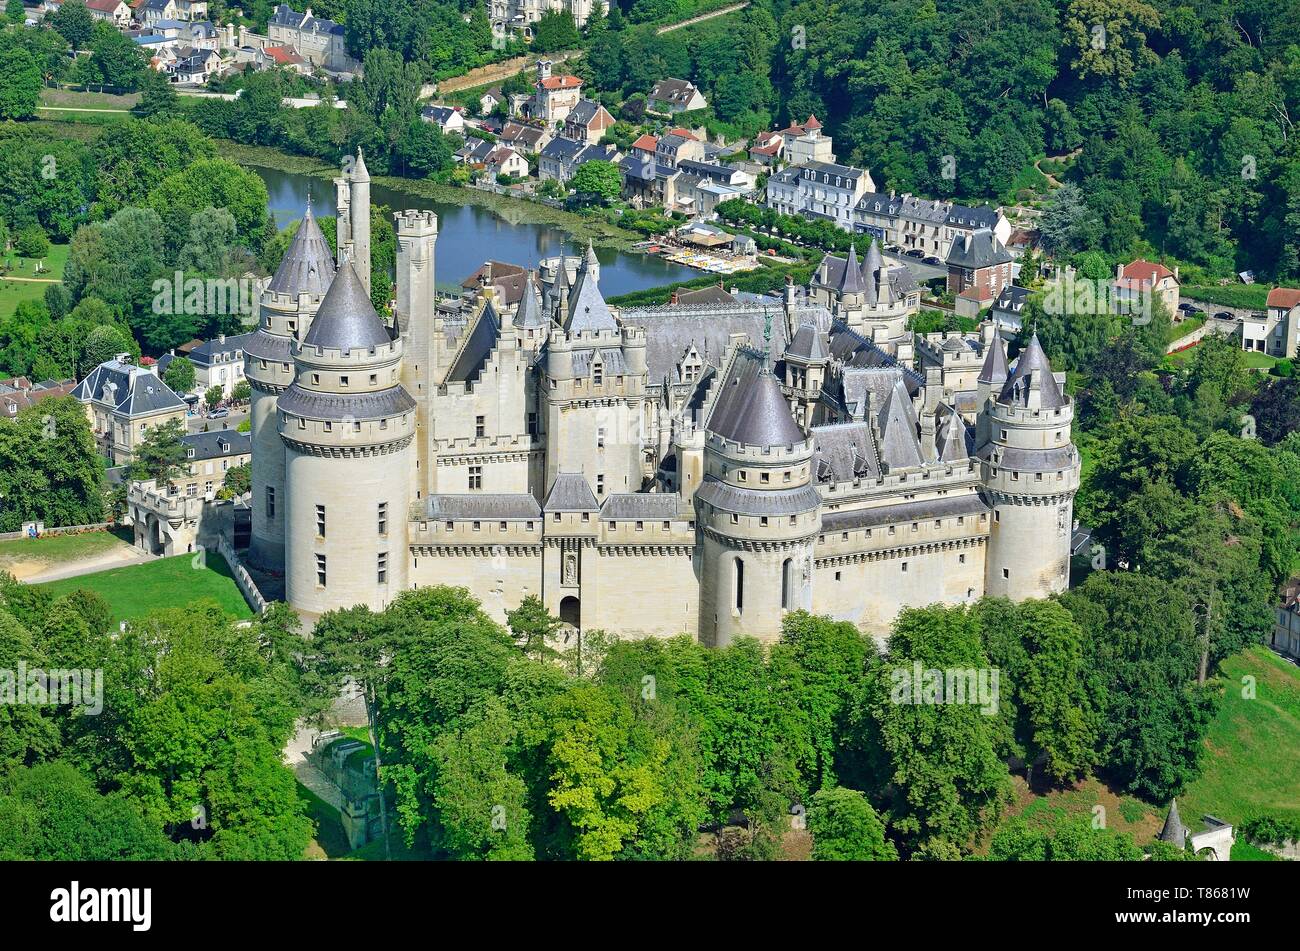 France Oise Pierrefonds Castle Of Pierrefonds Renovated By Viollet Le Duc Aerial View Stock Photo Alamy